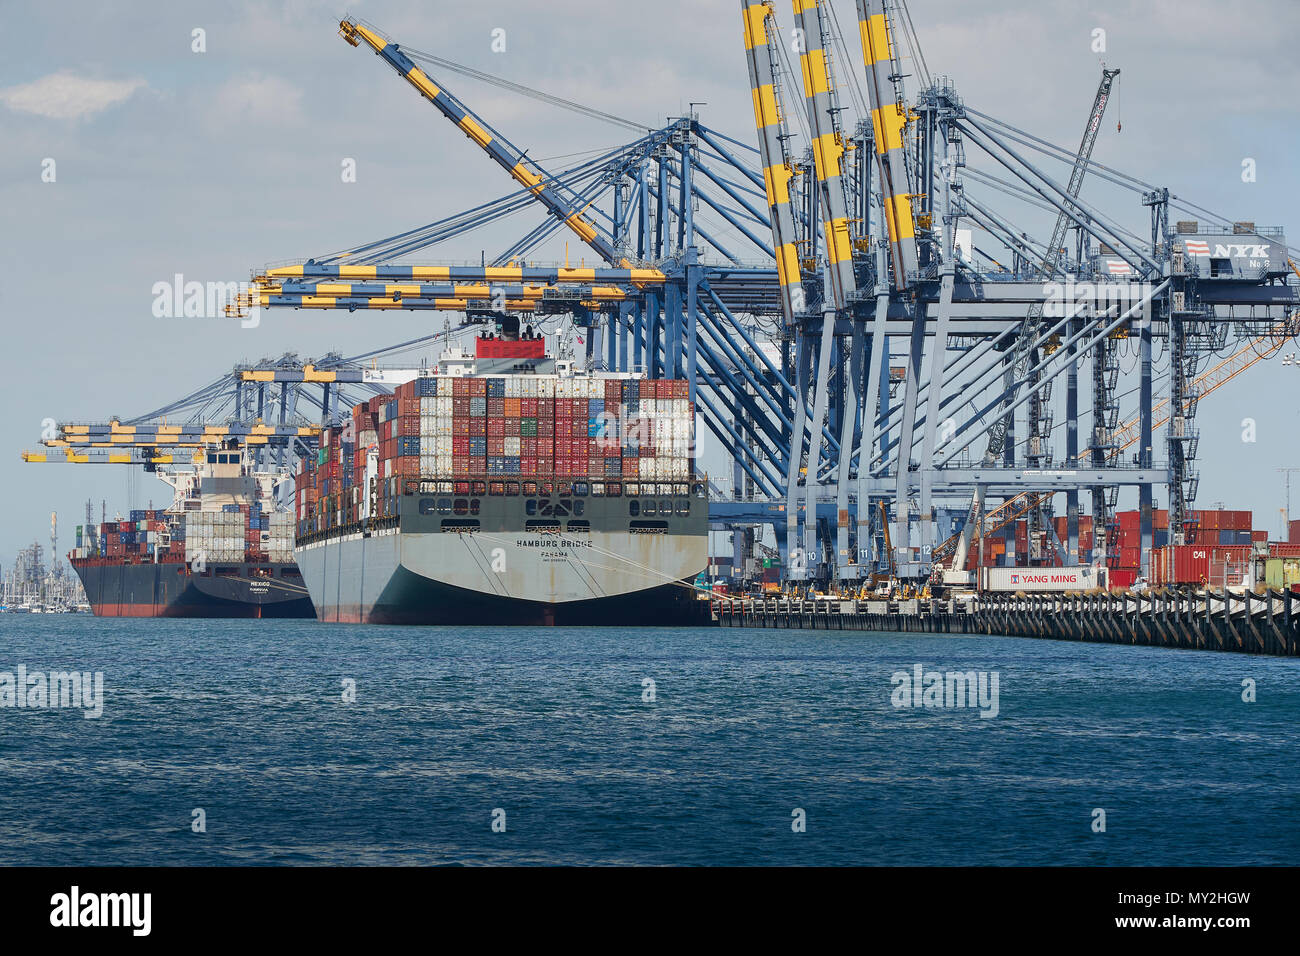 The Giant Container Ships, HAMBURG BRIDGE And MEXICO, Loading And Unloading In The Port Of Los Angeles, California, USA. Stock Photo